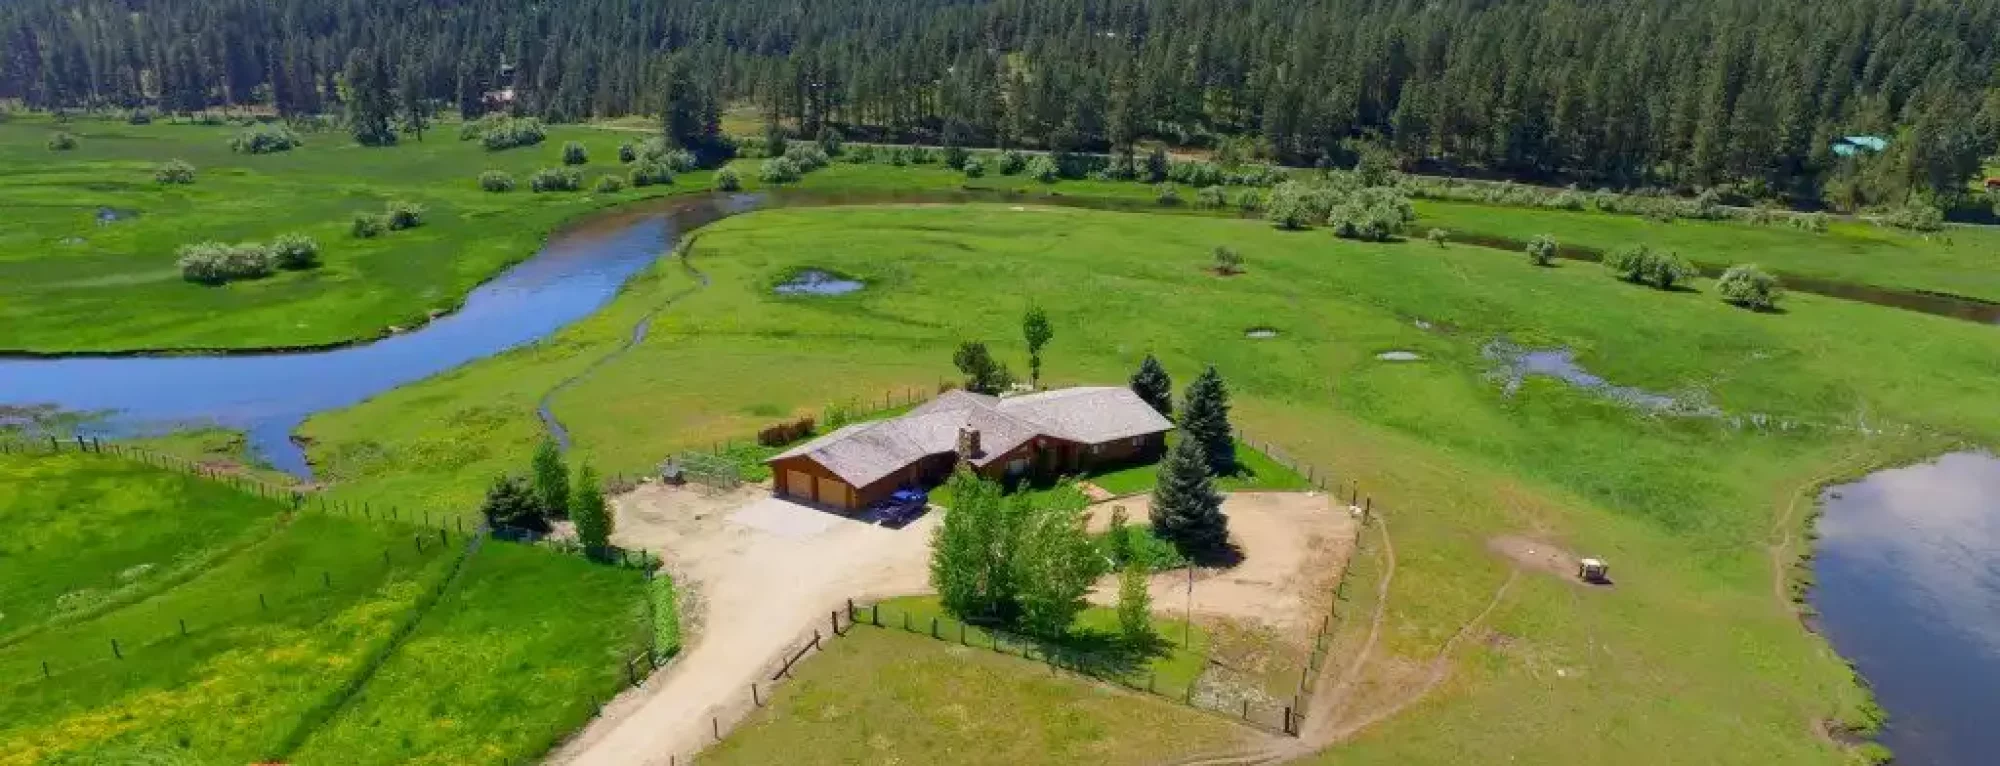 hot-springs-ranch-for-sale-new-meadows-idaho